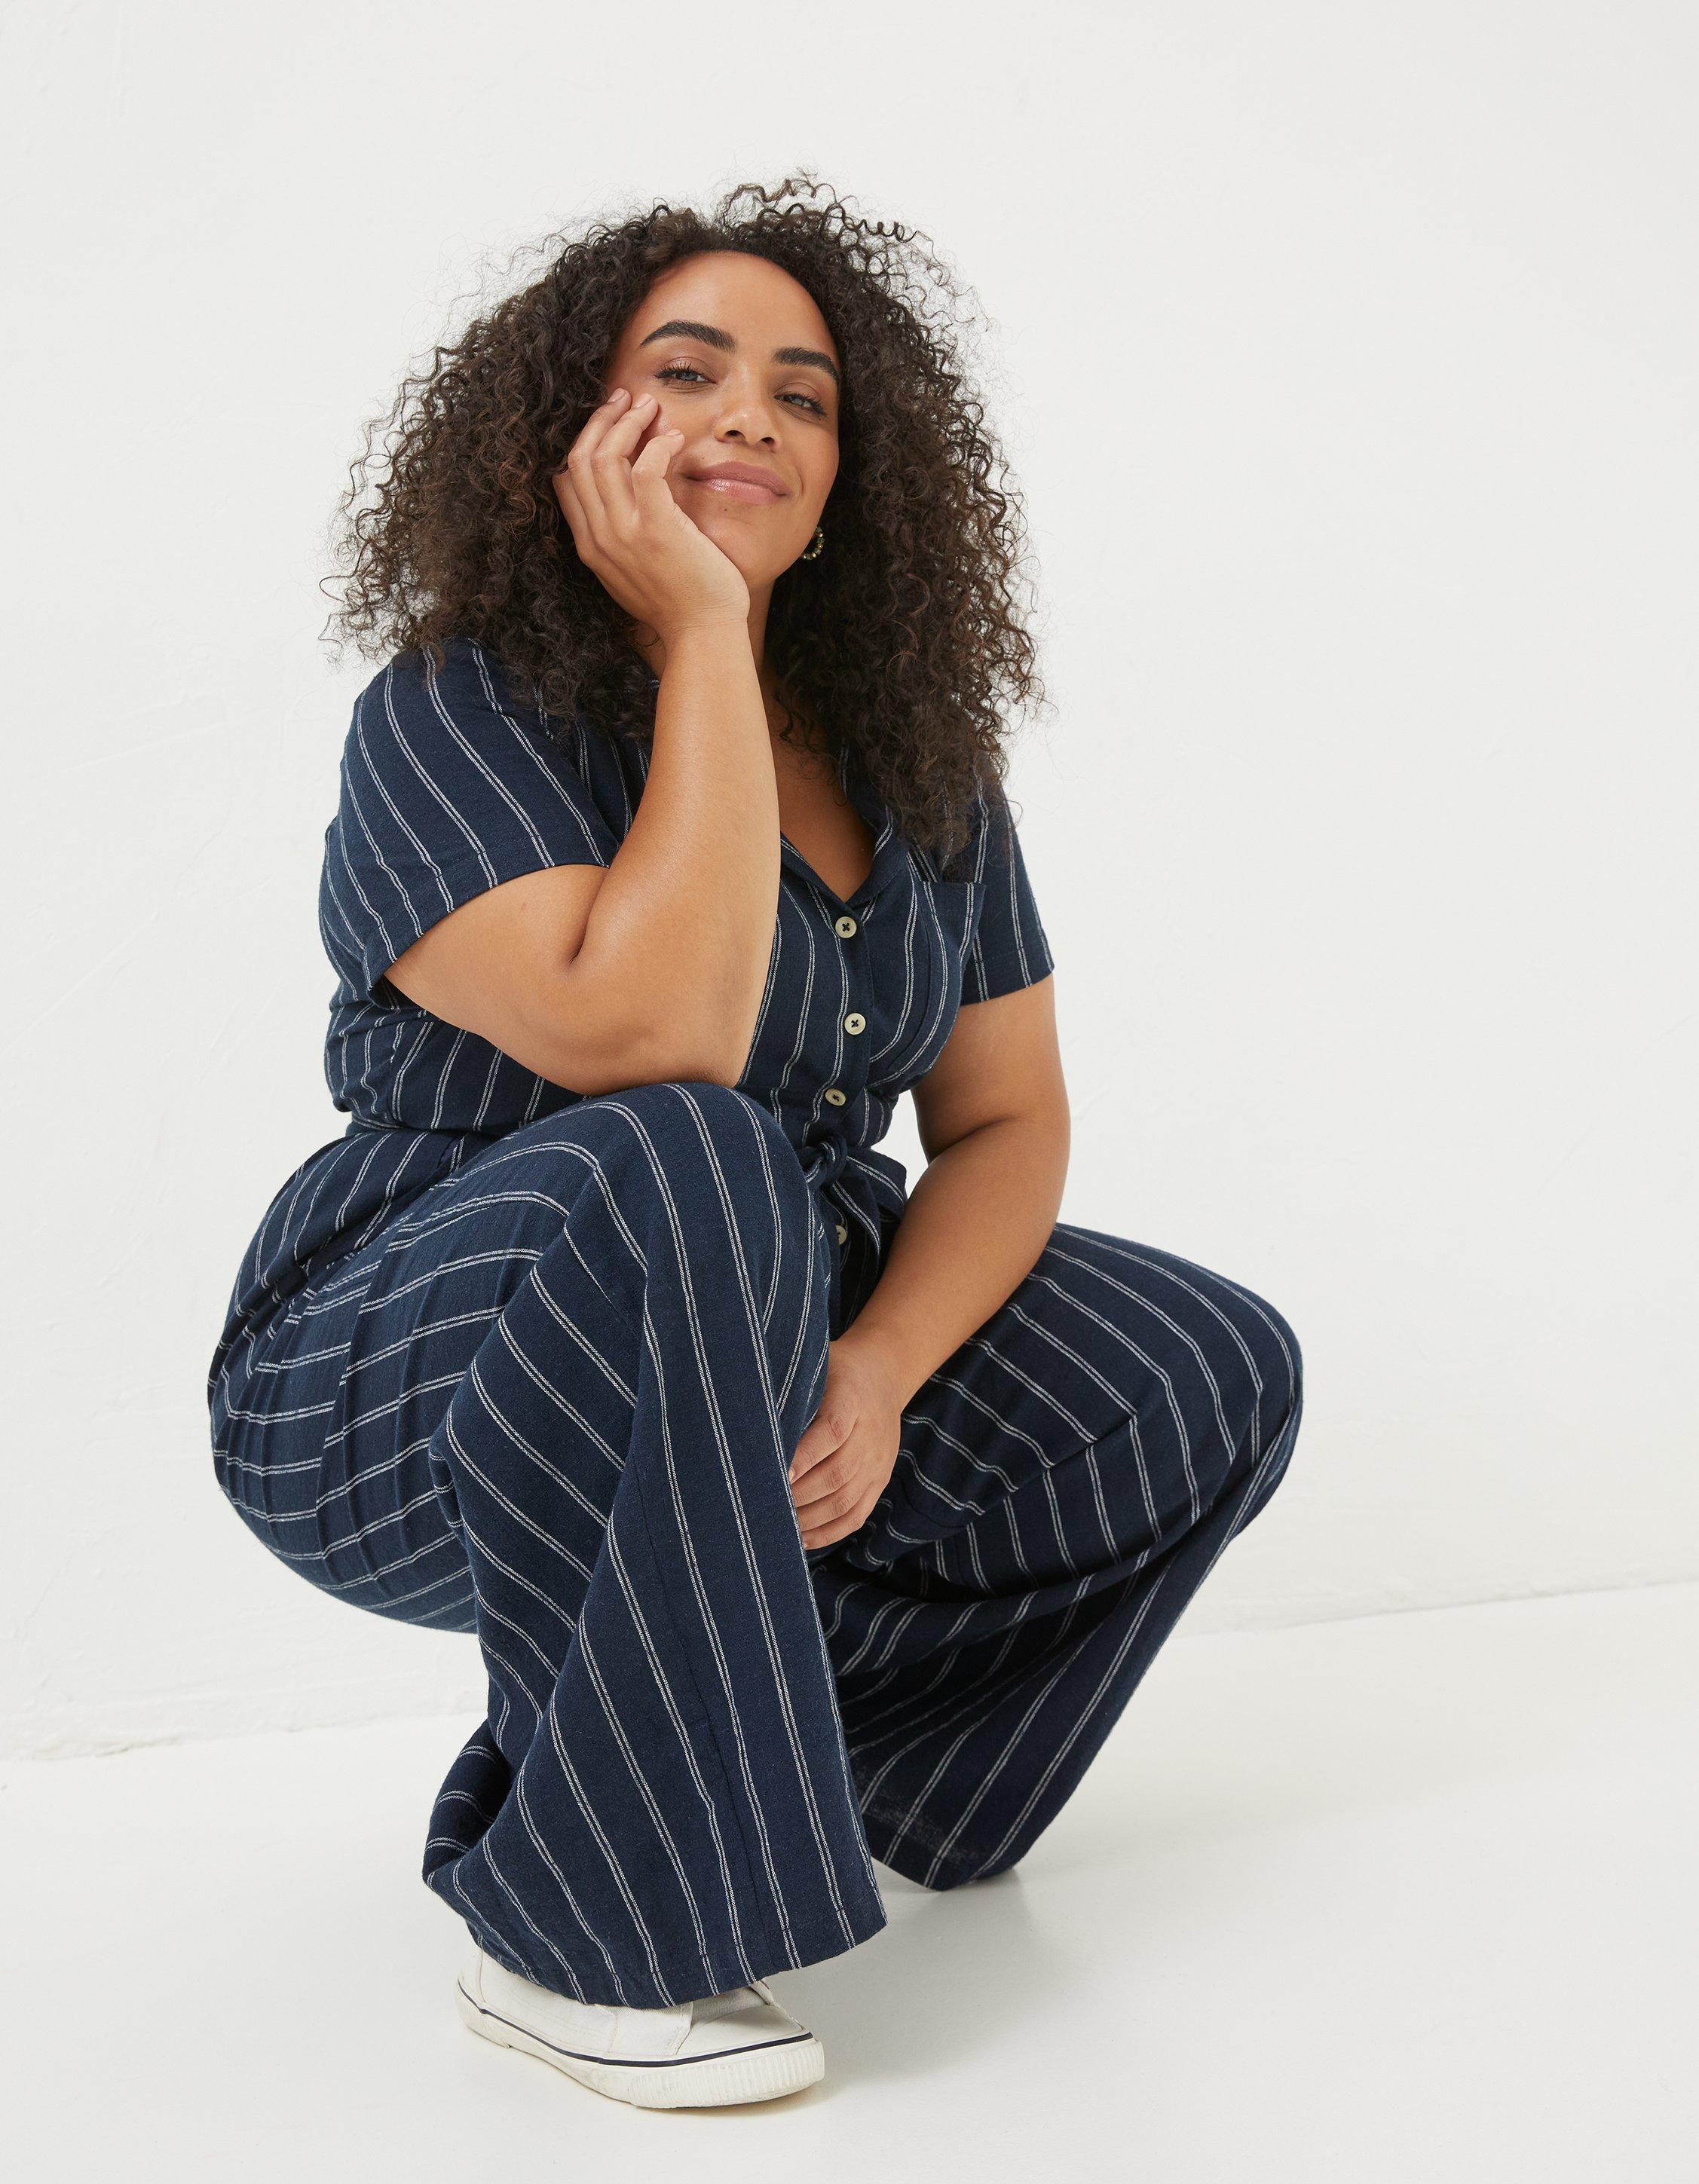 TOAST - DELAVE LINEN JUMPSUIT  Weighty delave linen, with a neat, gently  pointed collar. Bracelet-length sleeves, drawstring waist with self-fabric  ties to fasten. Dropped crotch, very wide, ankle-skimming trousers and  pockets